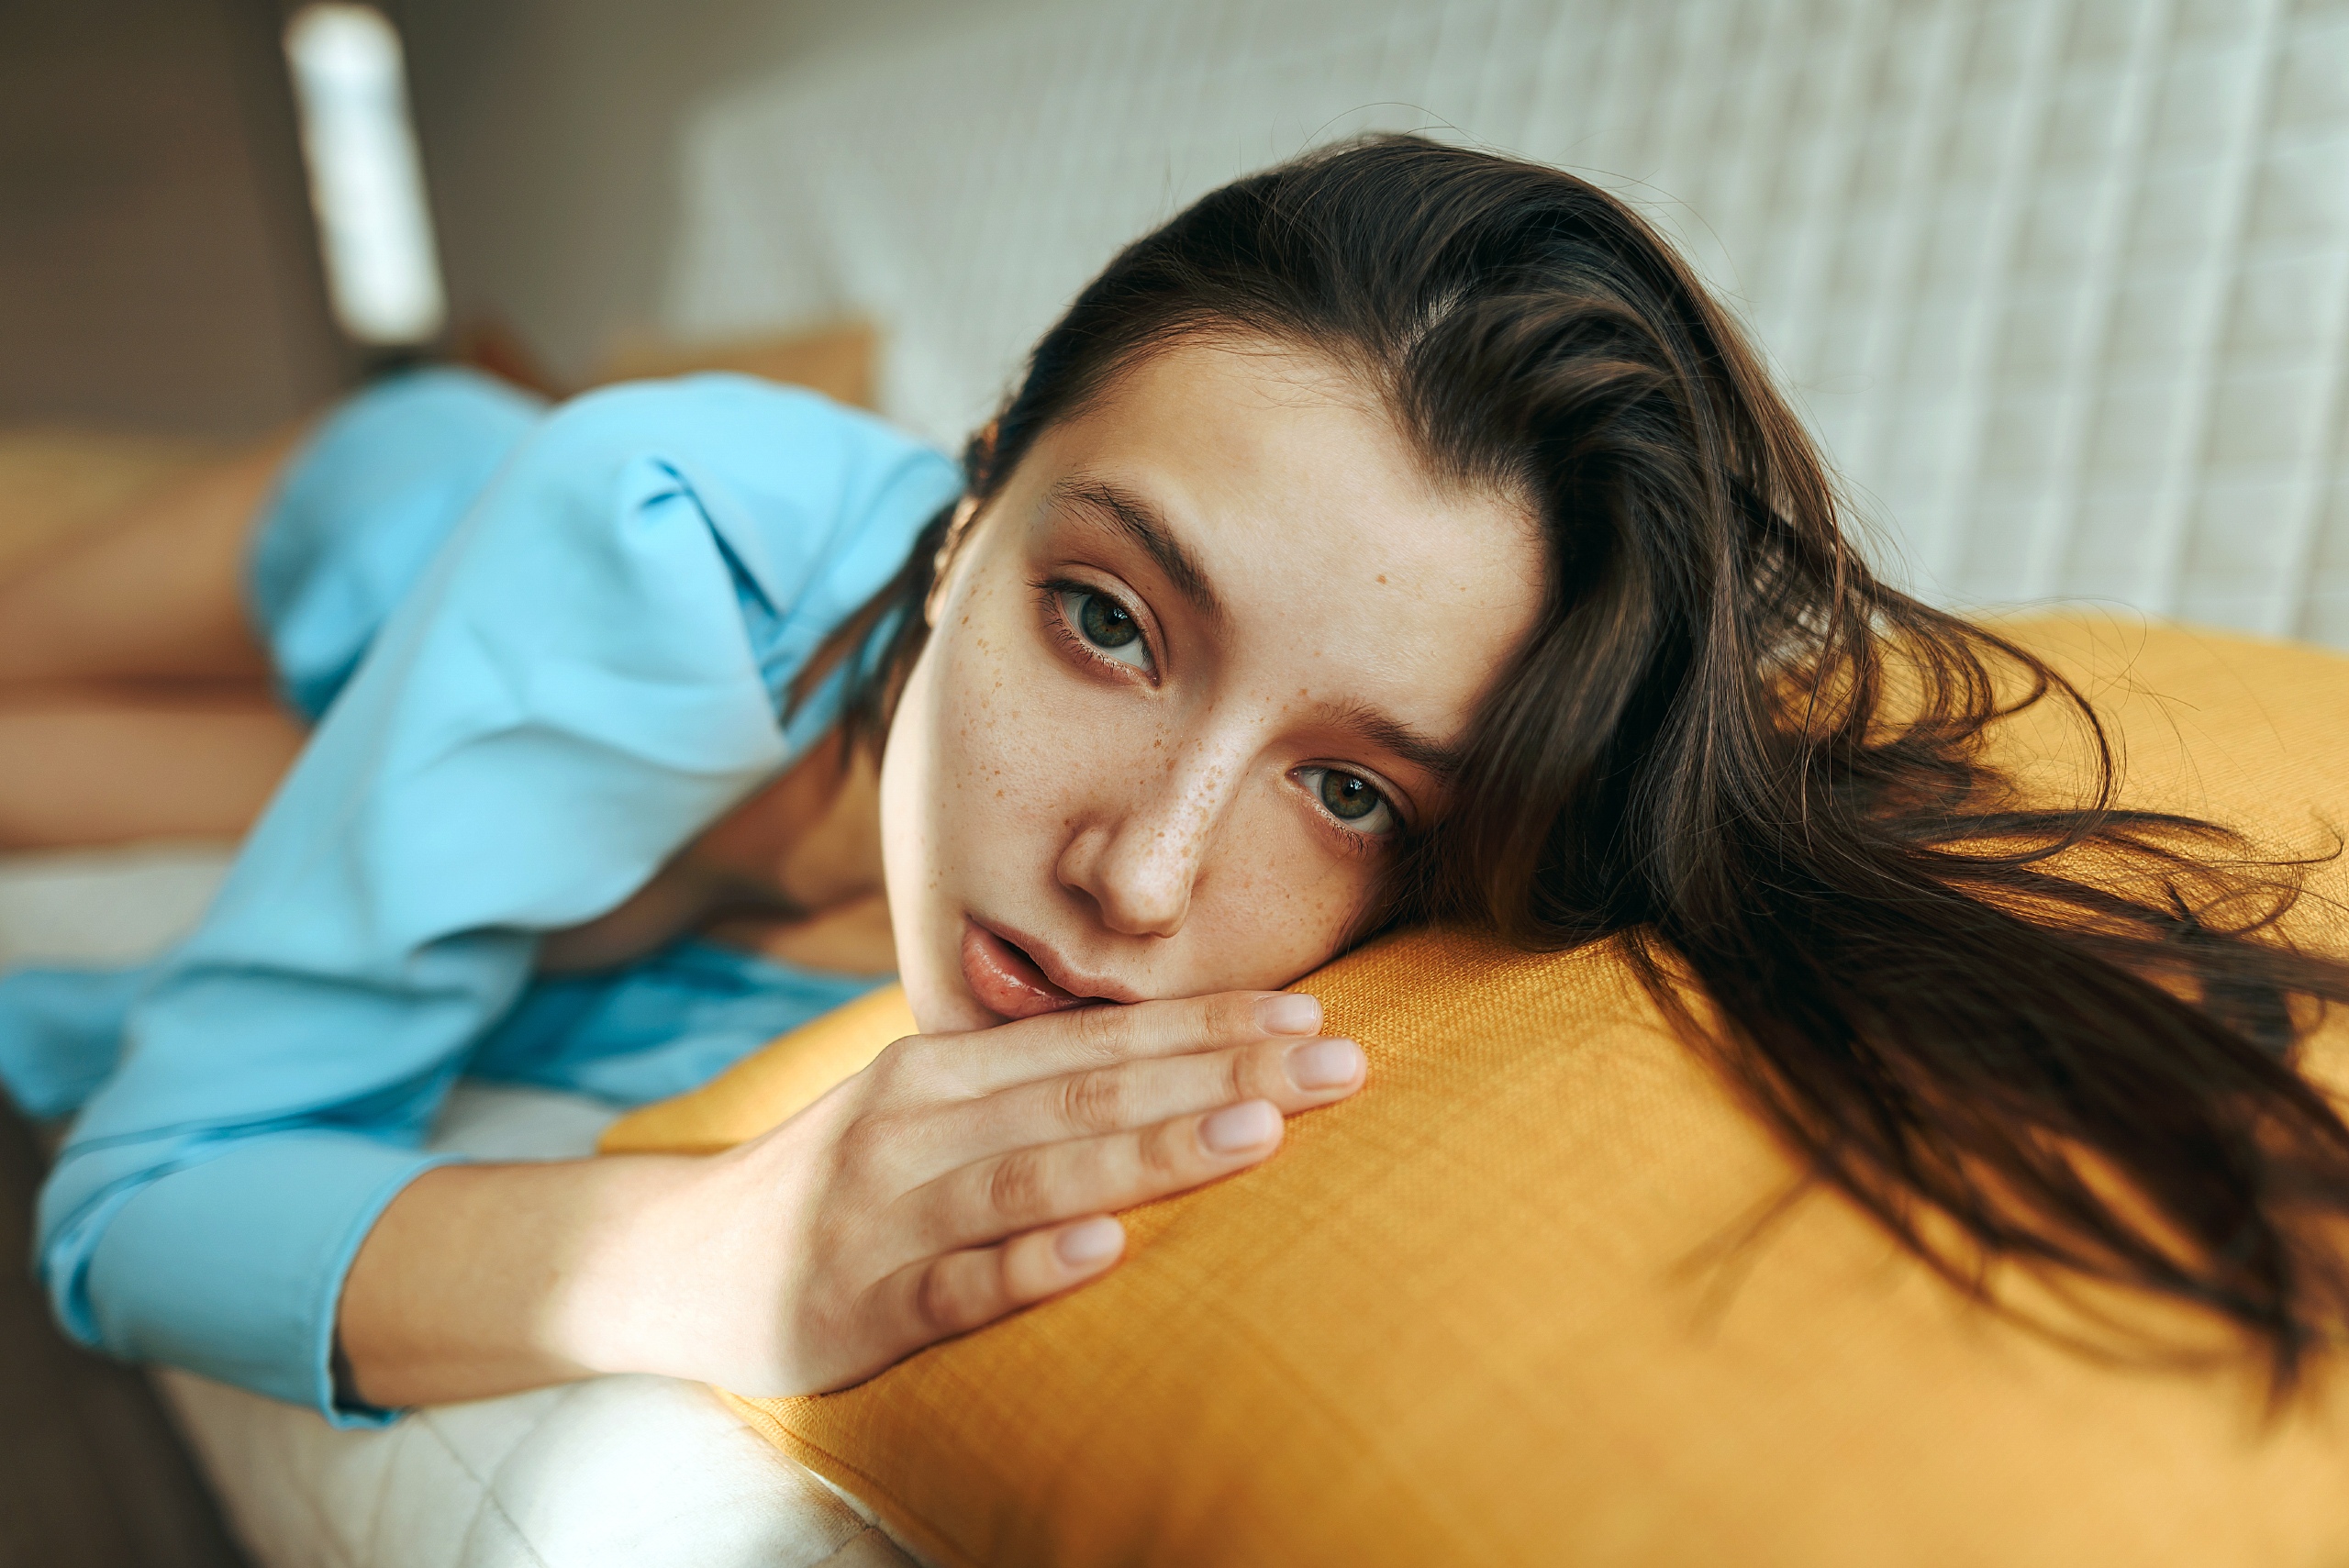 Alina Borodina Women Model Brunette Looking At Viewer Face Freckles Cushions Couch Bokeh Indoors Wom 2560x1709